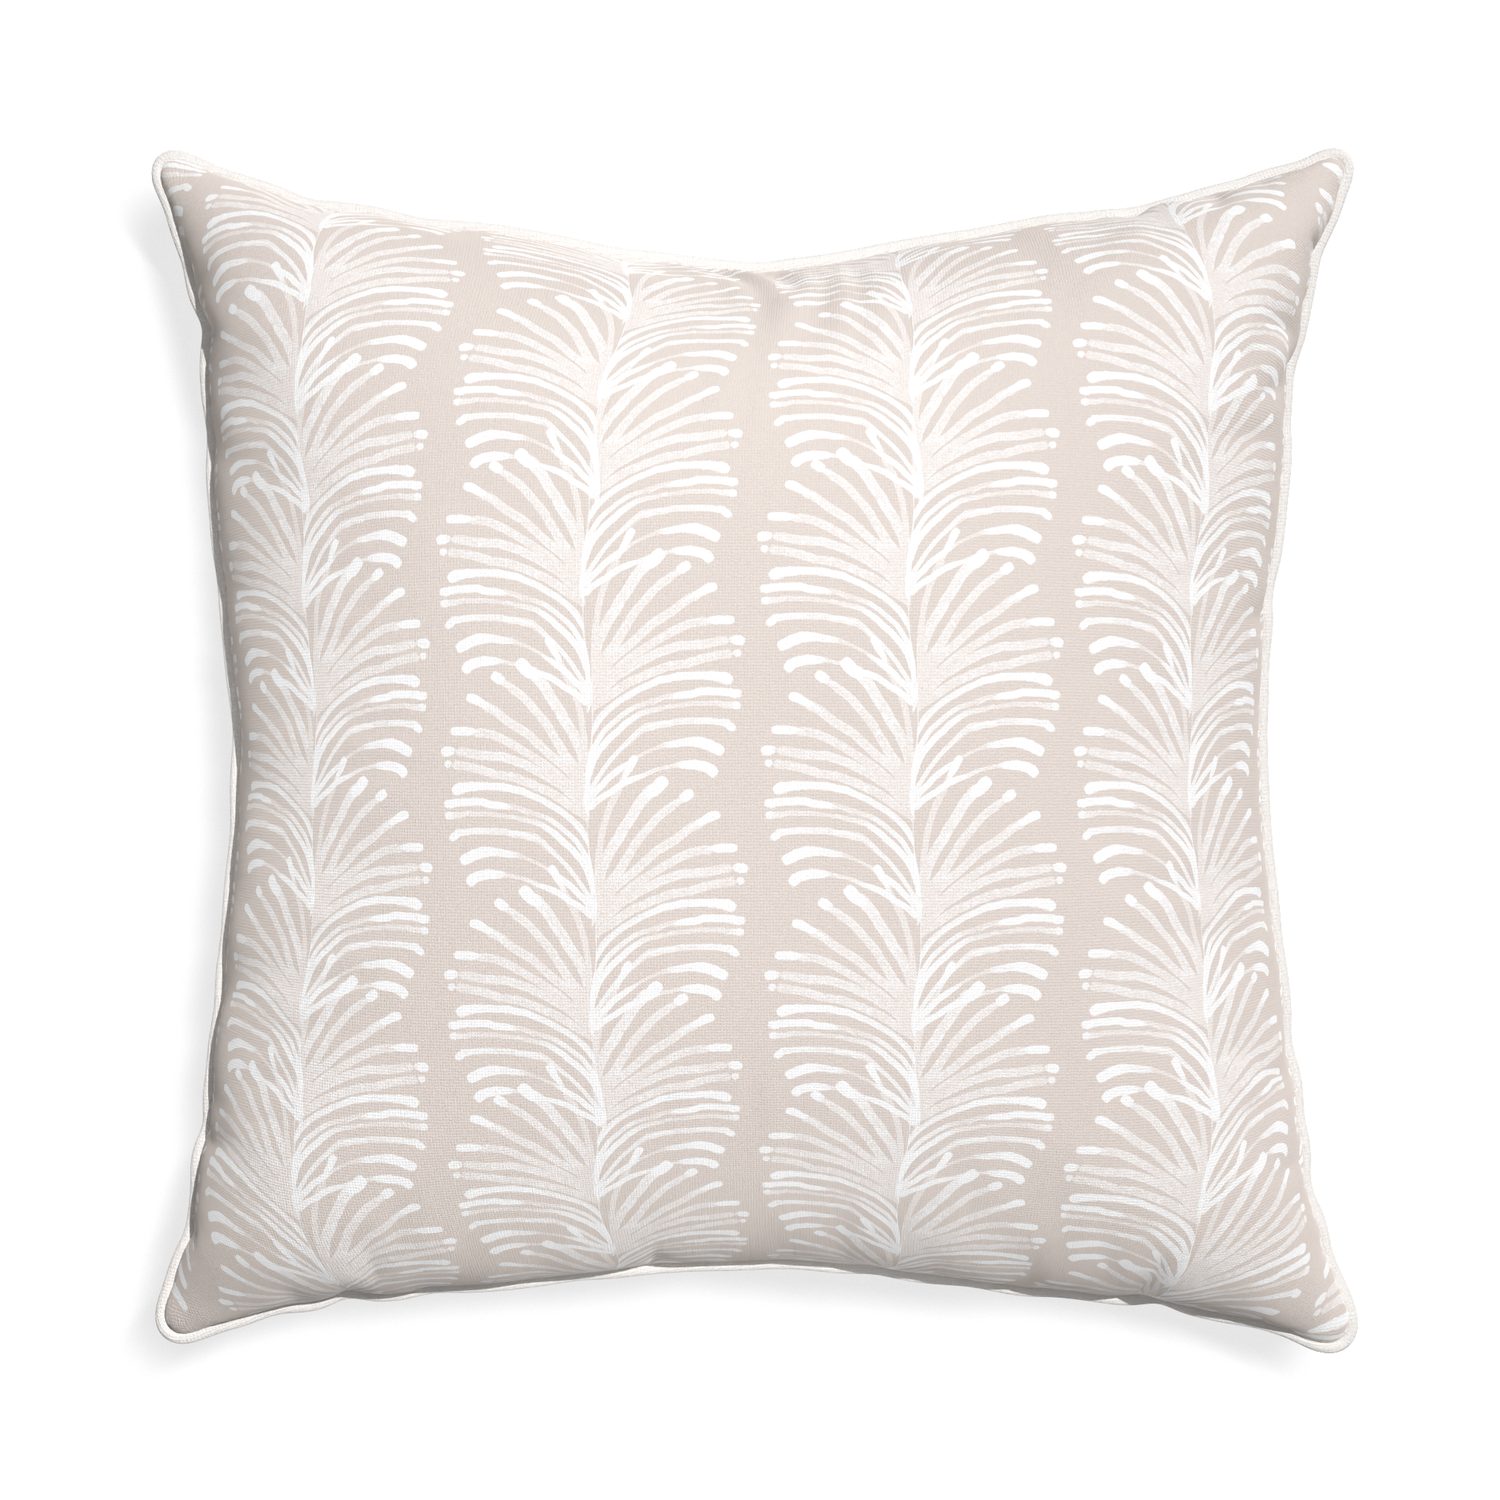 Euro-sham emma sand custom sand colored botanical stripepillow with snow piping on white background